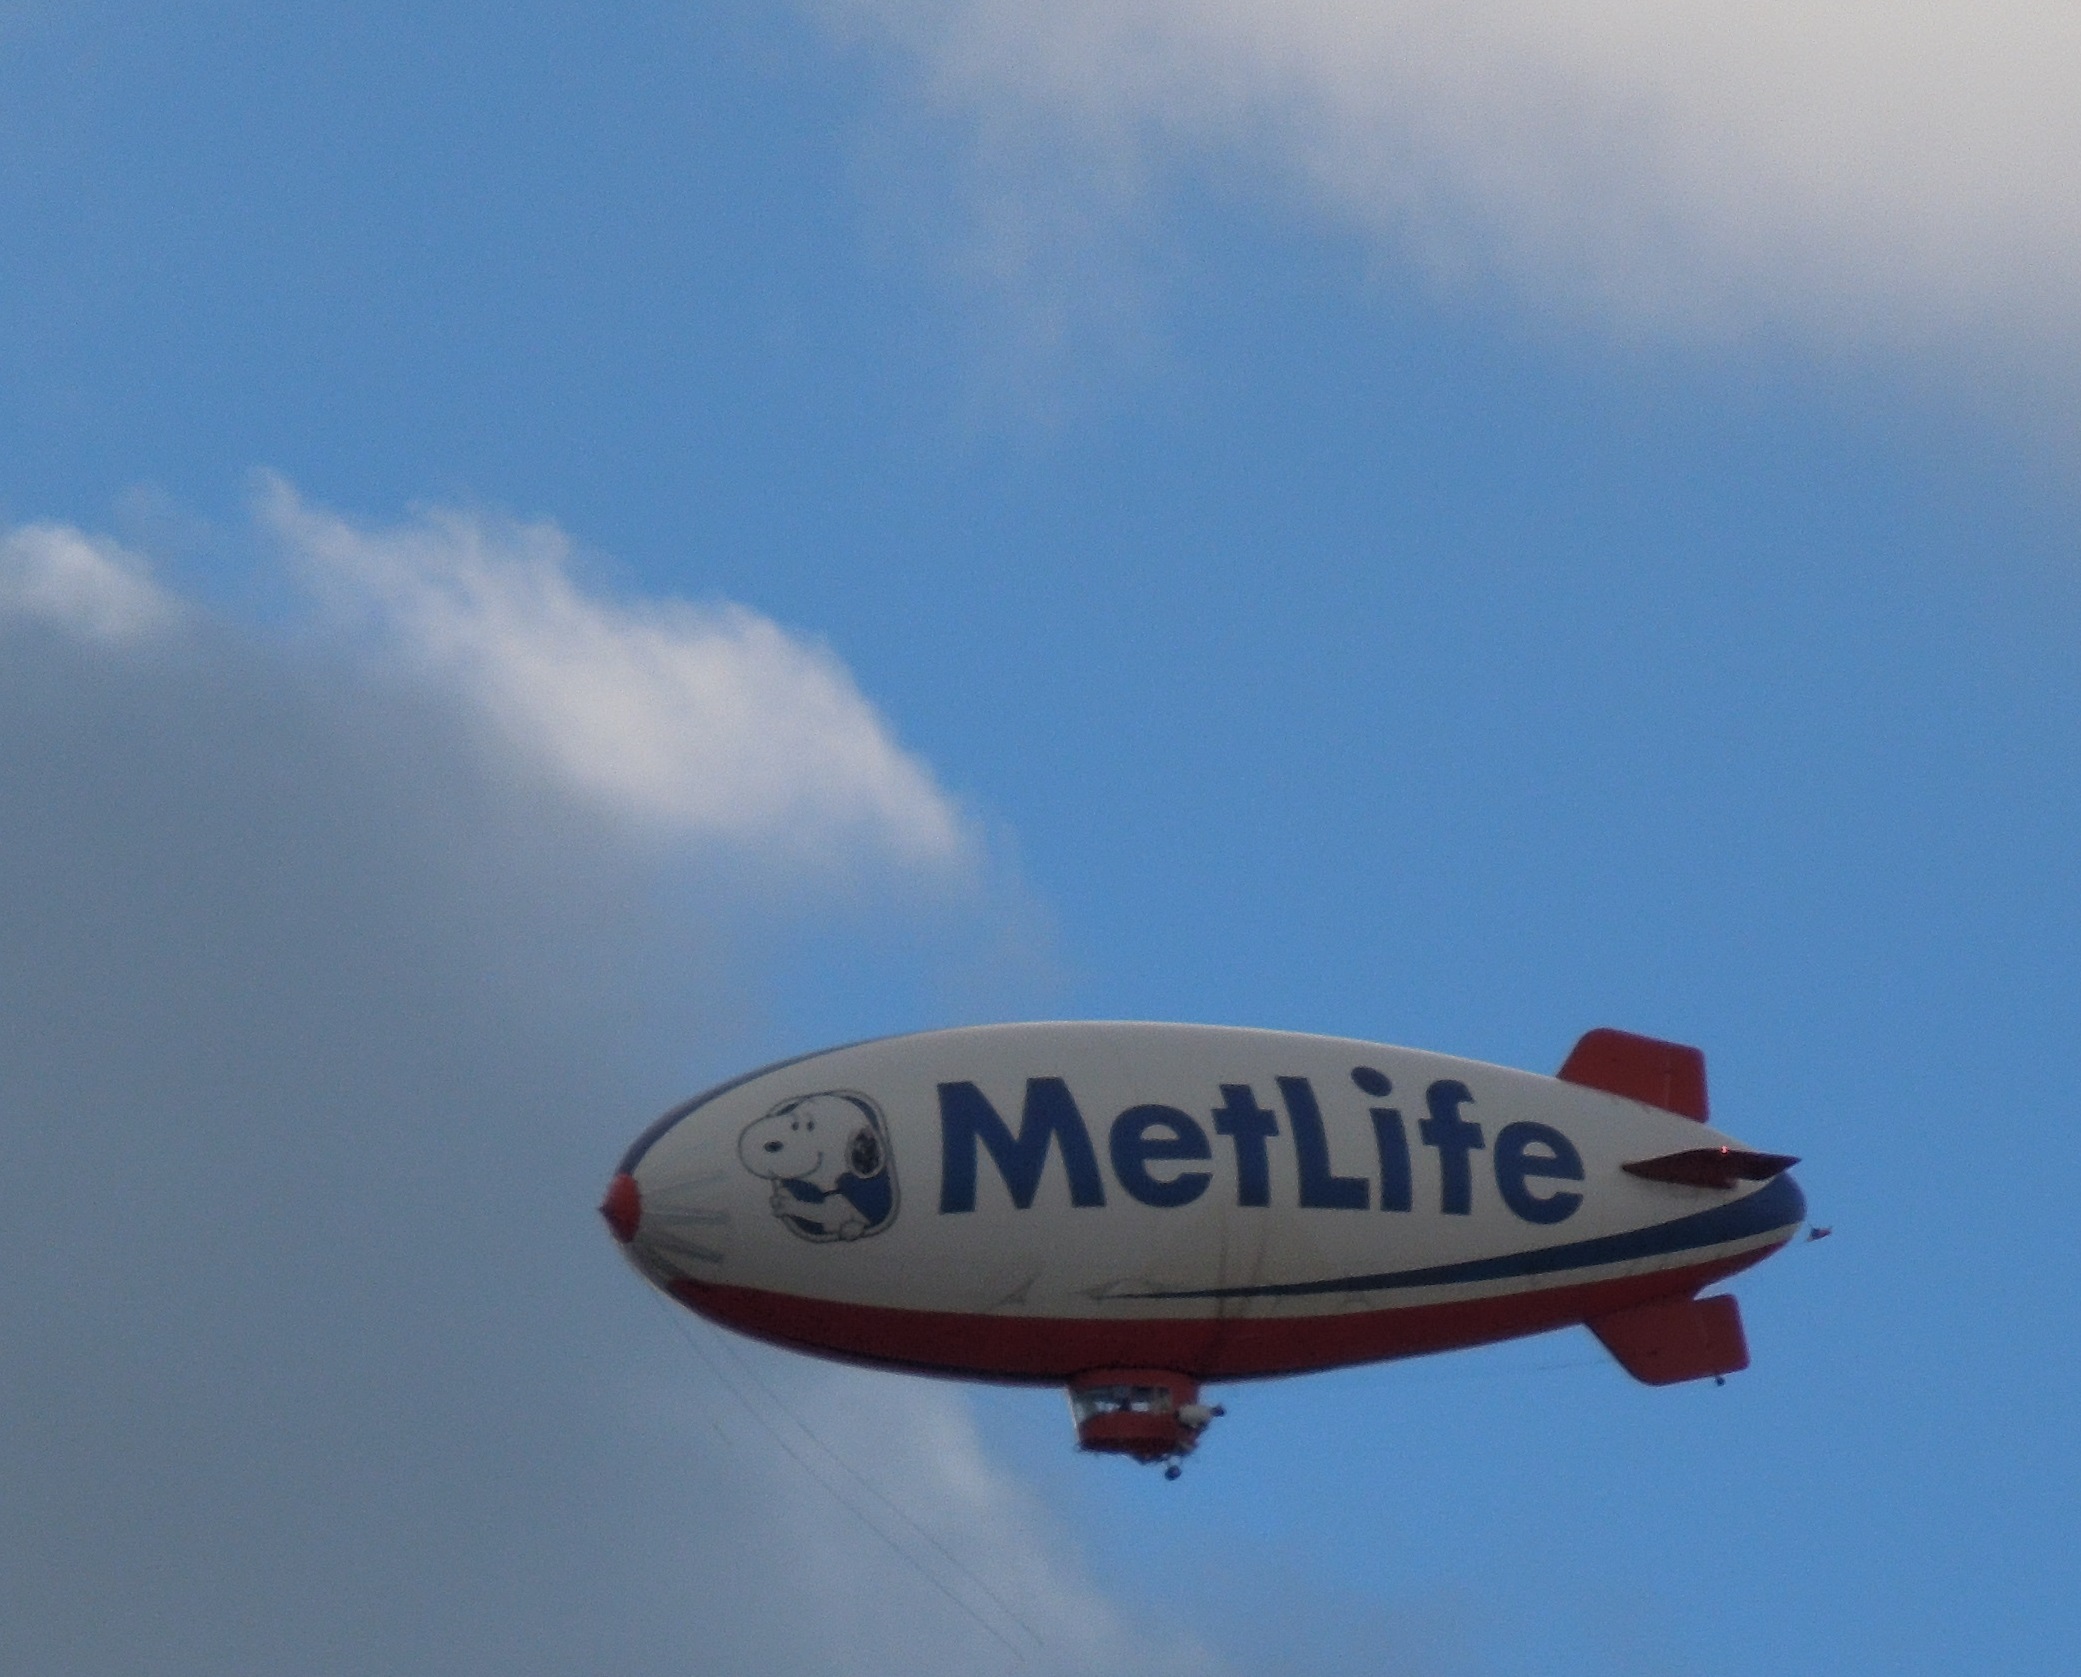 Met Life Blimp over Paso Robles